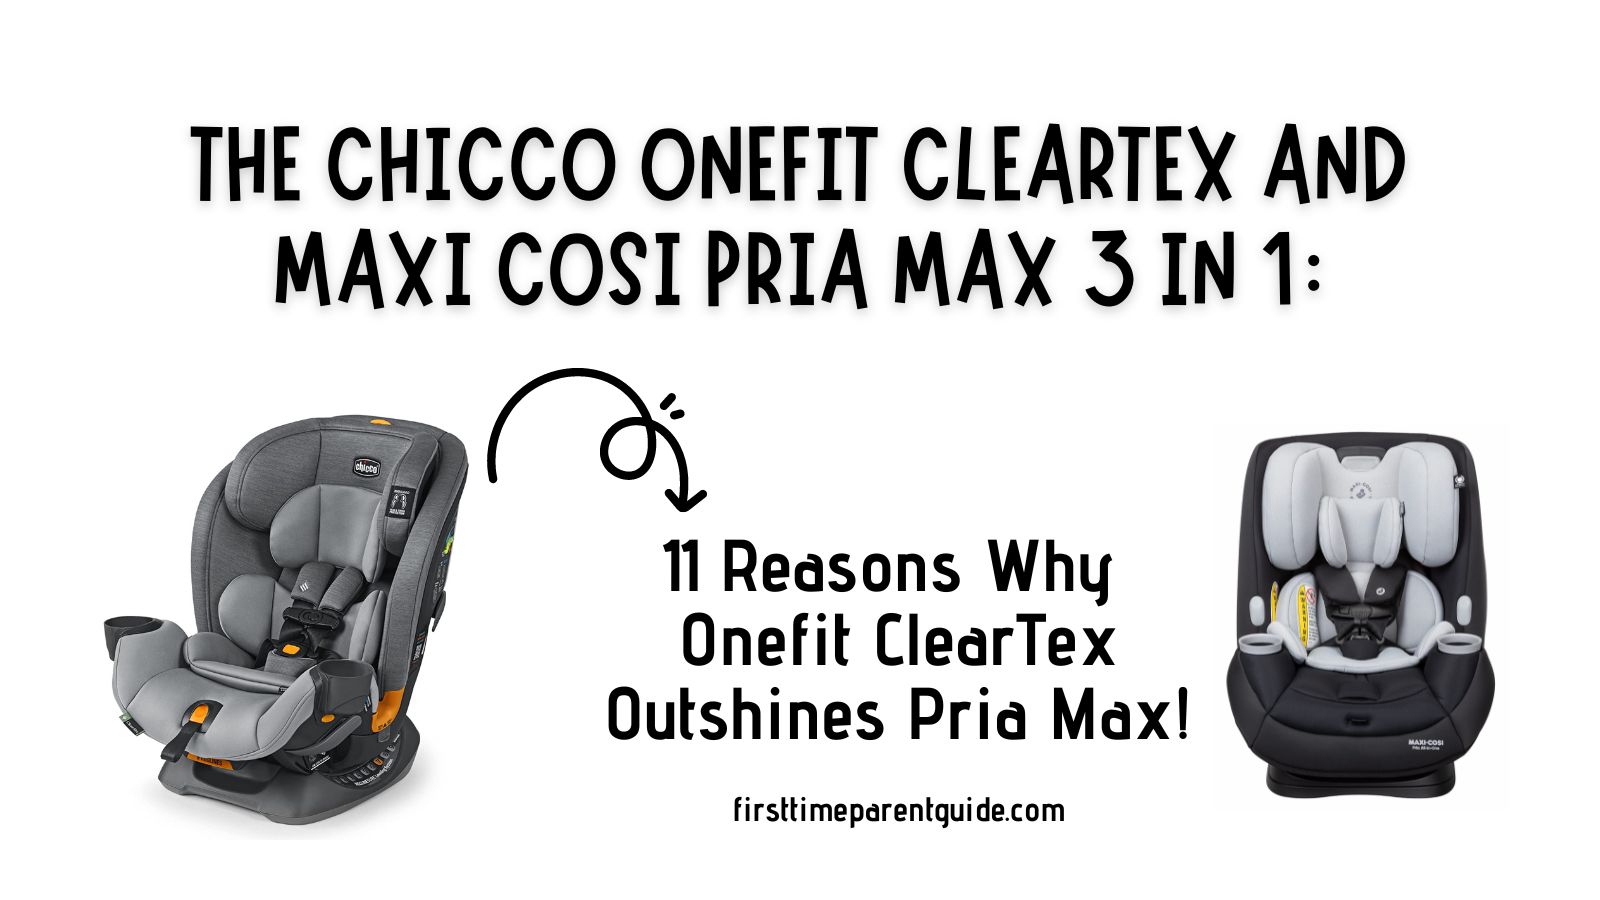 The Chicco Onefit ClearTex and